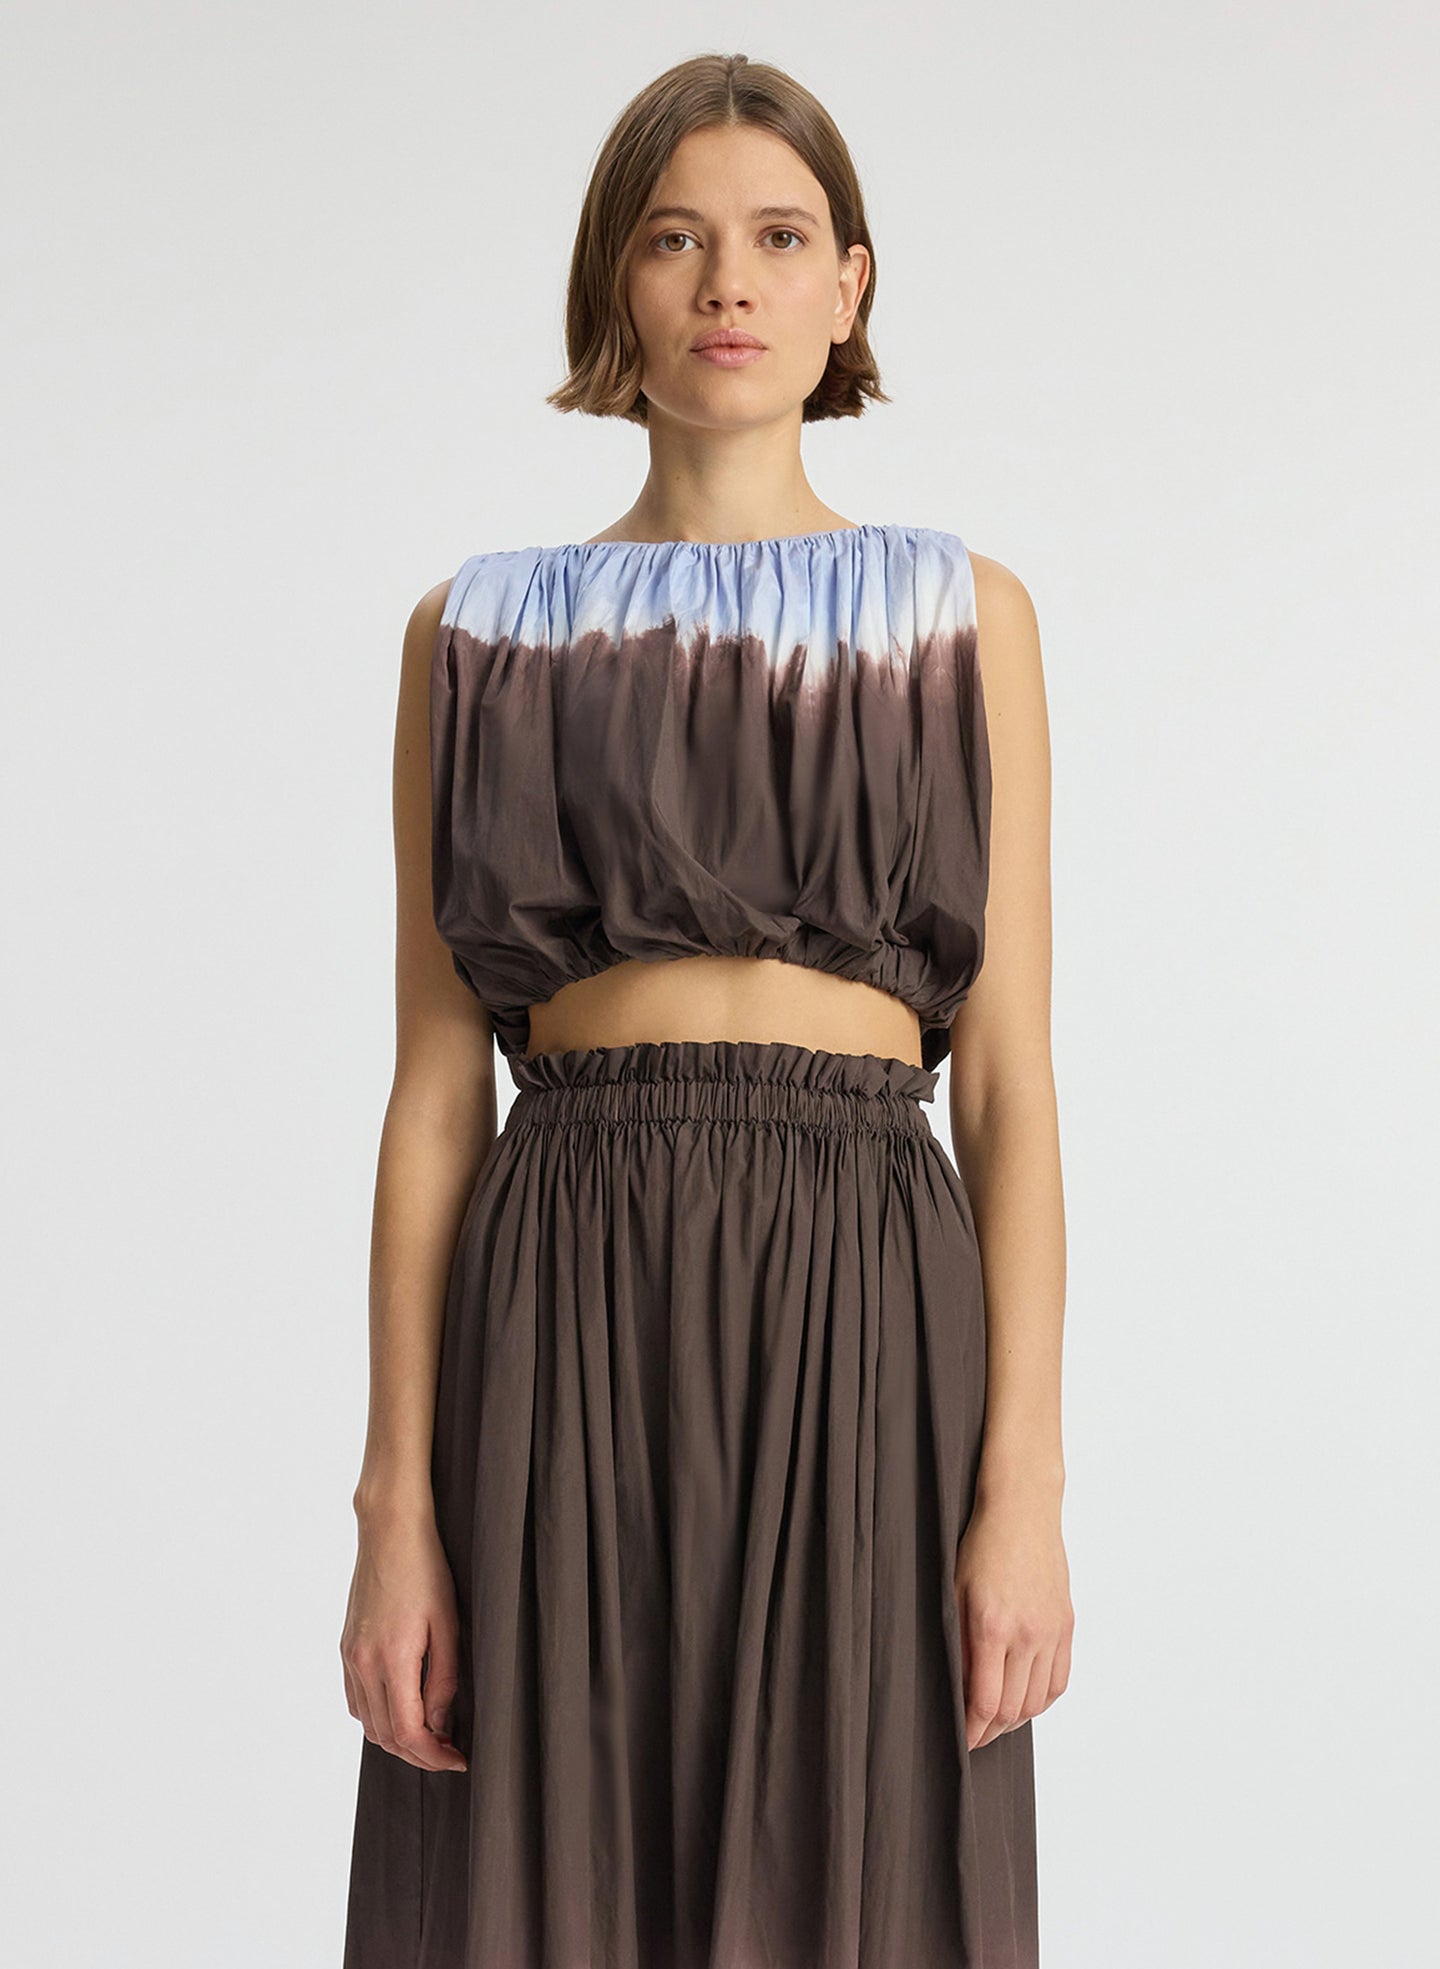 detail view of woman wearing light blue and brown dip dyed sleeveless top and matching midi skirt